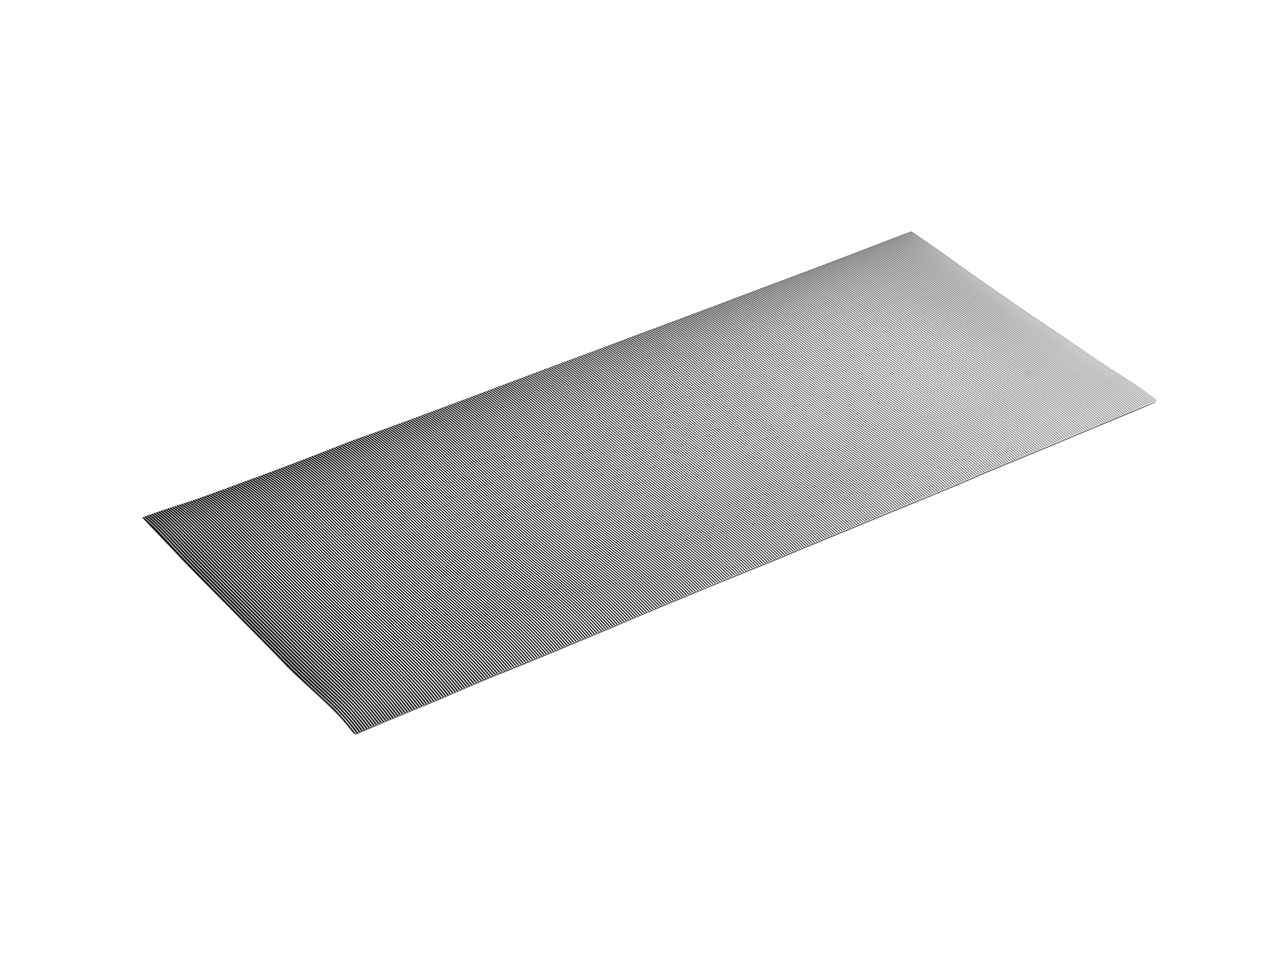 Anti-slide mat 2, up to 1200 mm cabinets, W 1100, D 480 mm, light grey